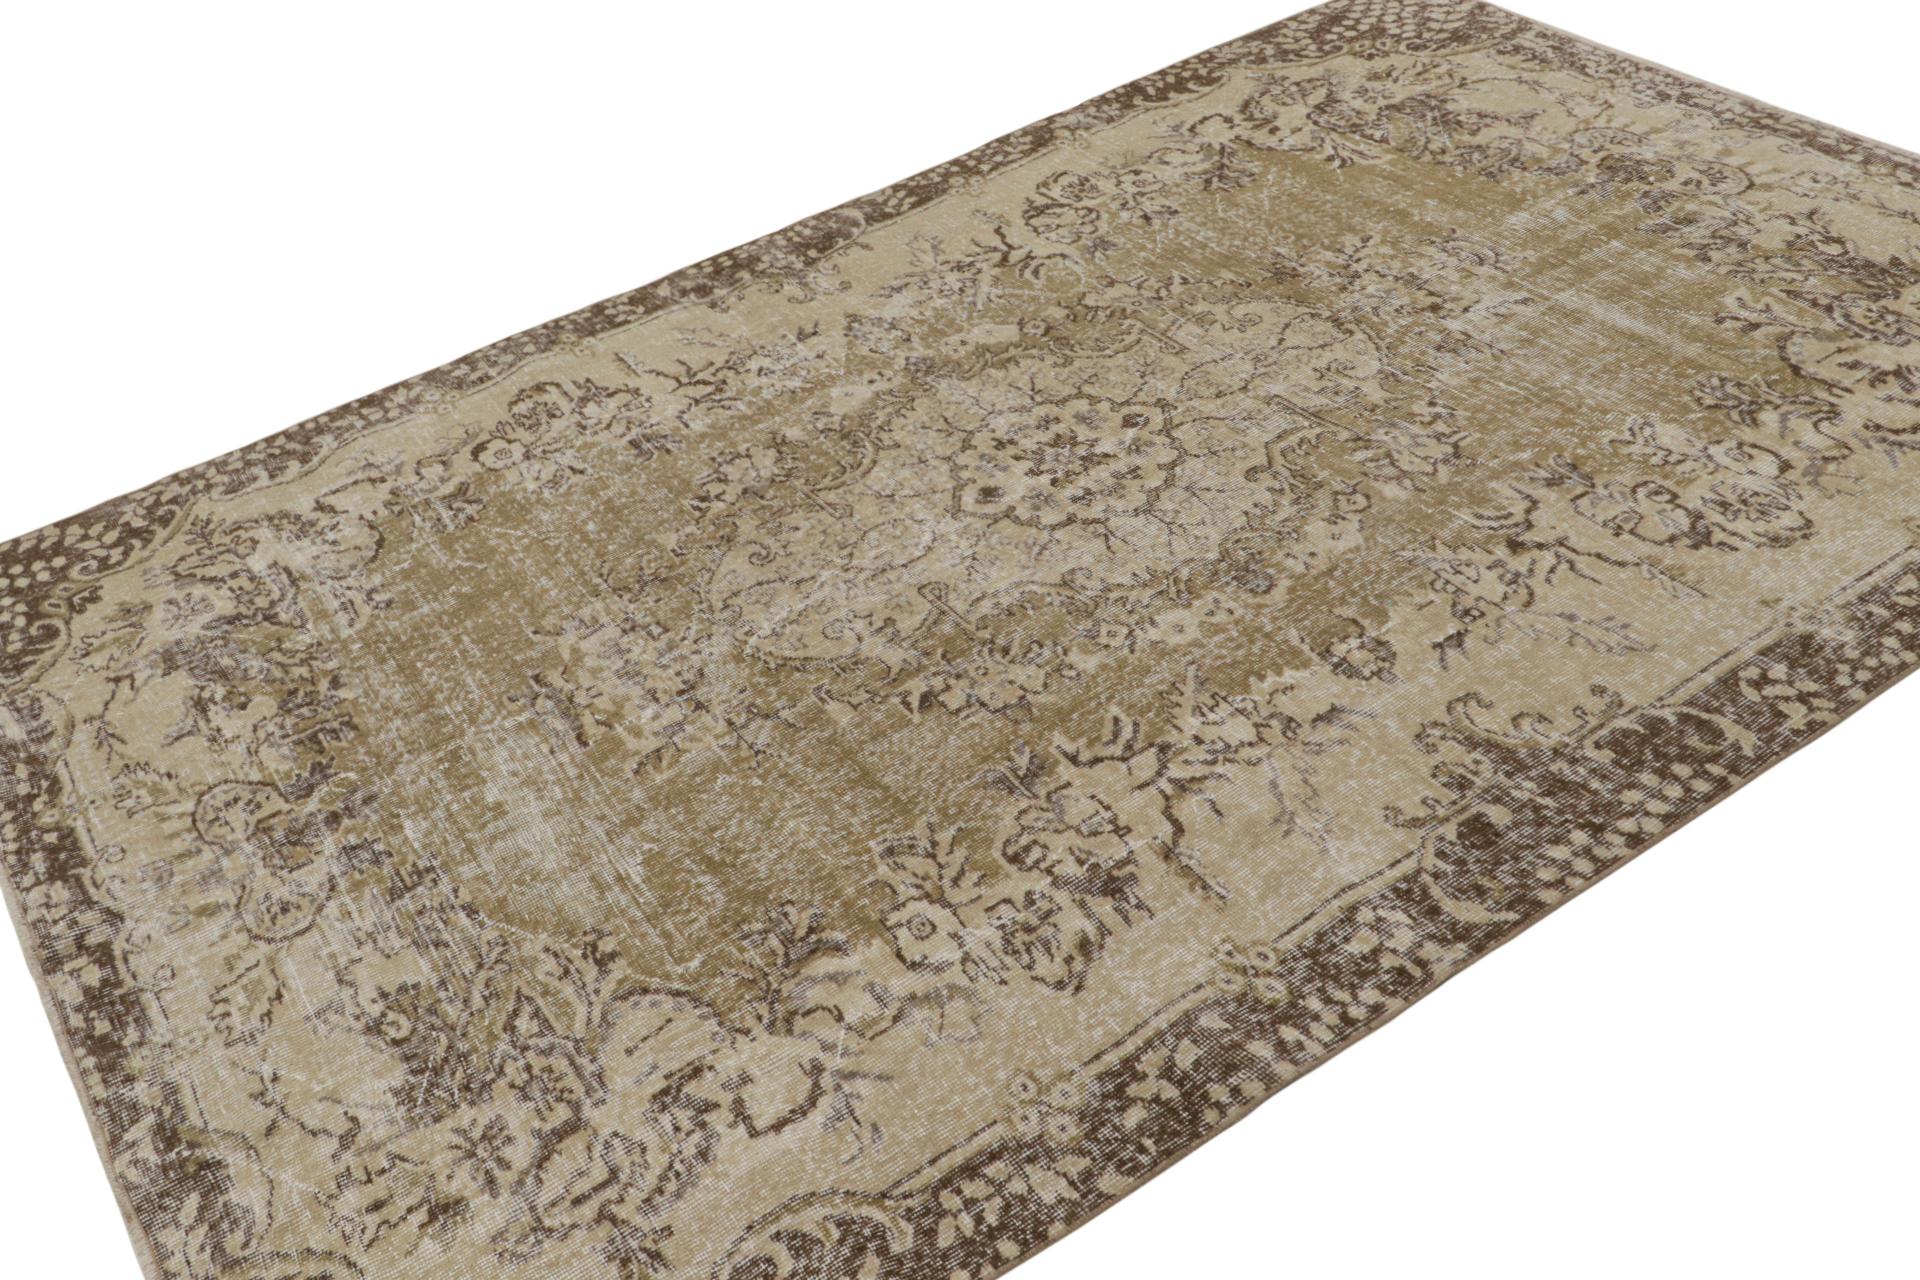 Hand-knotted in wool, circa 1960-1970, a vintage 6x9 rug believed to hail from Zeki Müren - latest to join Rug & Kilim’s collection of vintage selections. 

On the Design: 

Connoisseurs will appreciate a one-of-a-kind vintage design in beige-brown